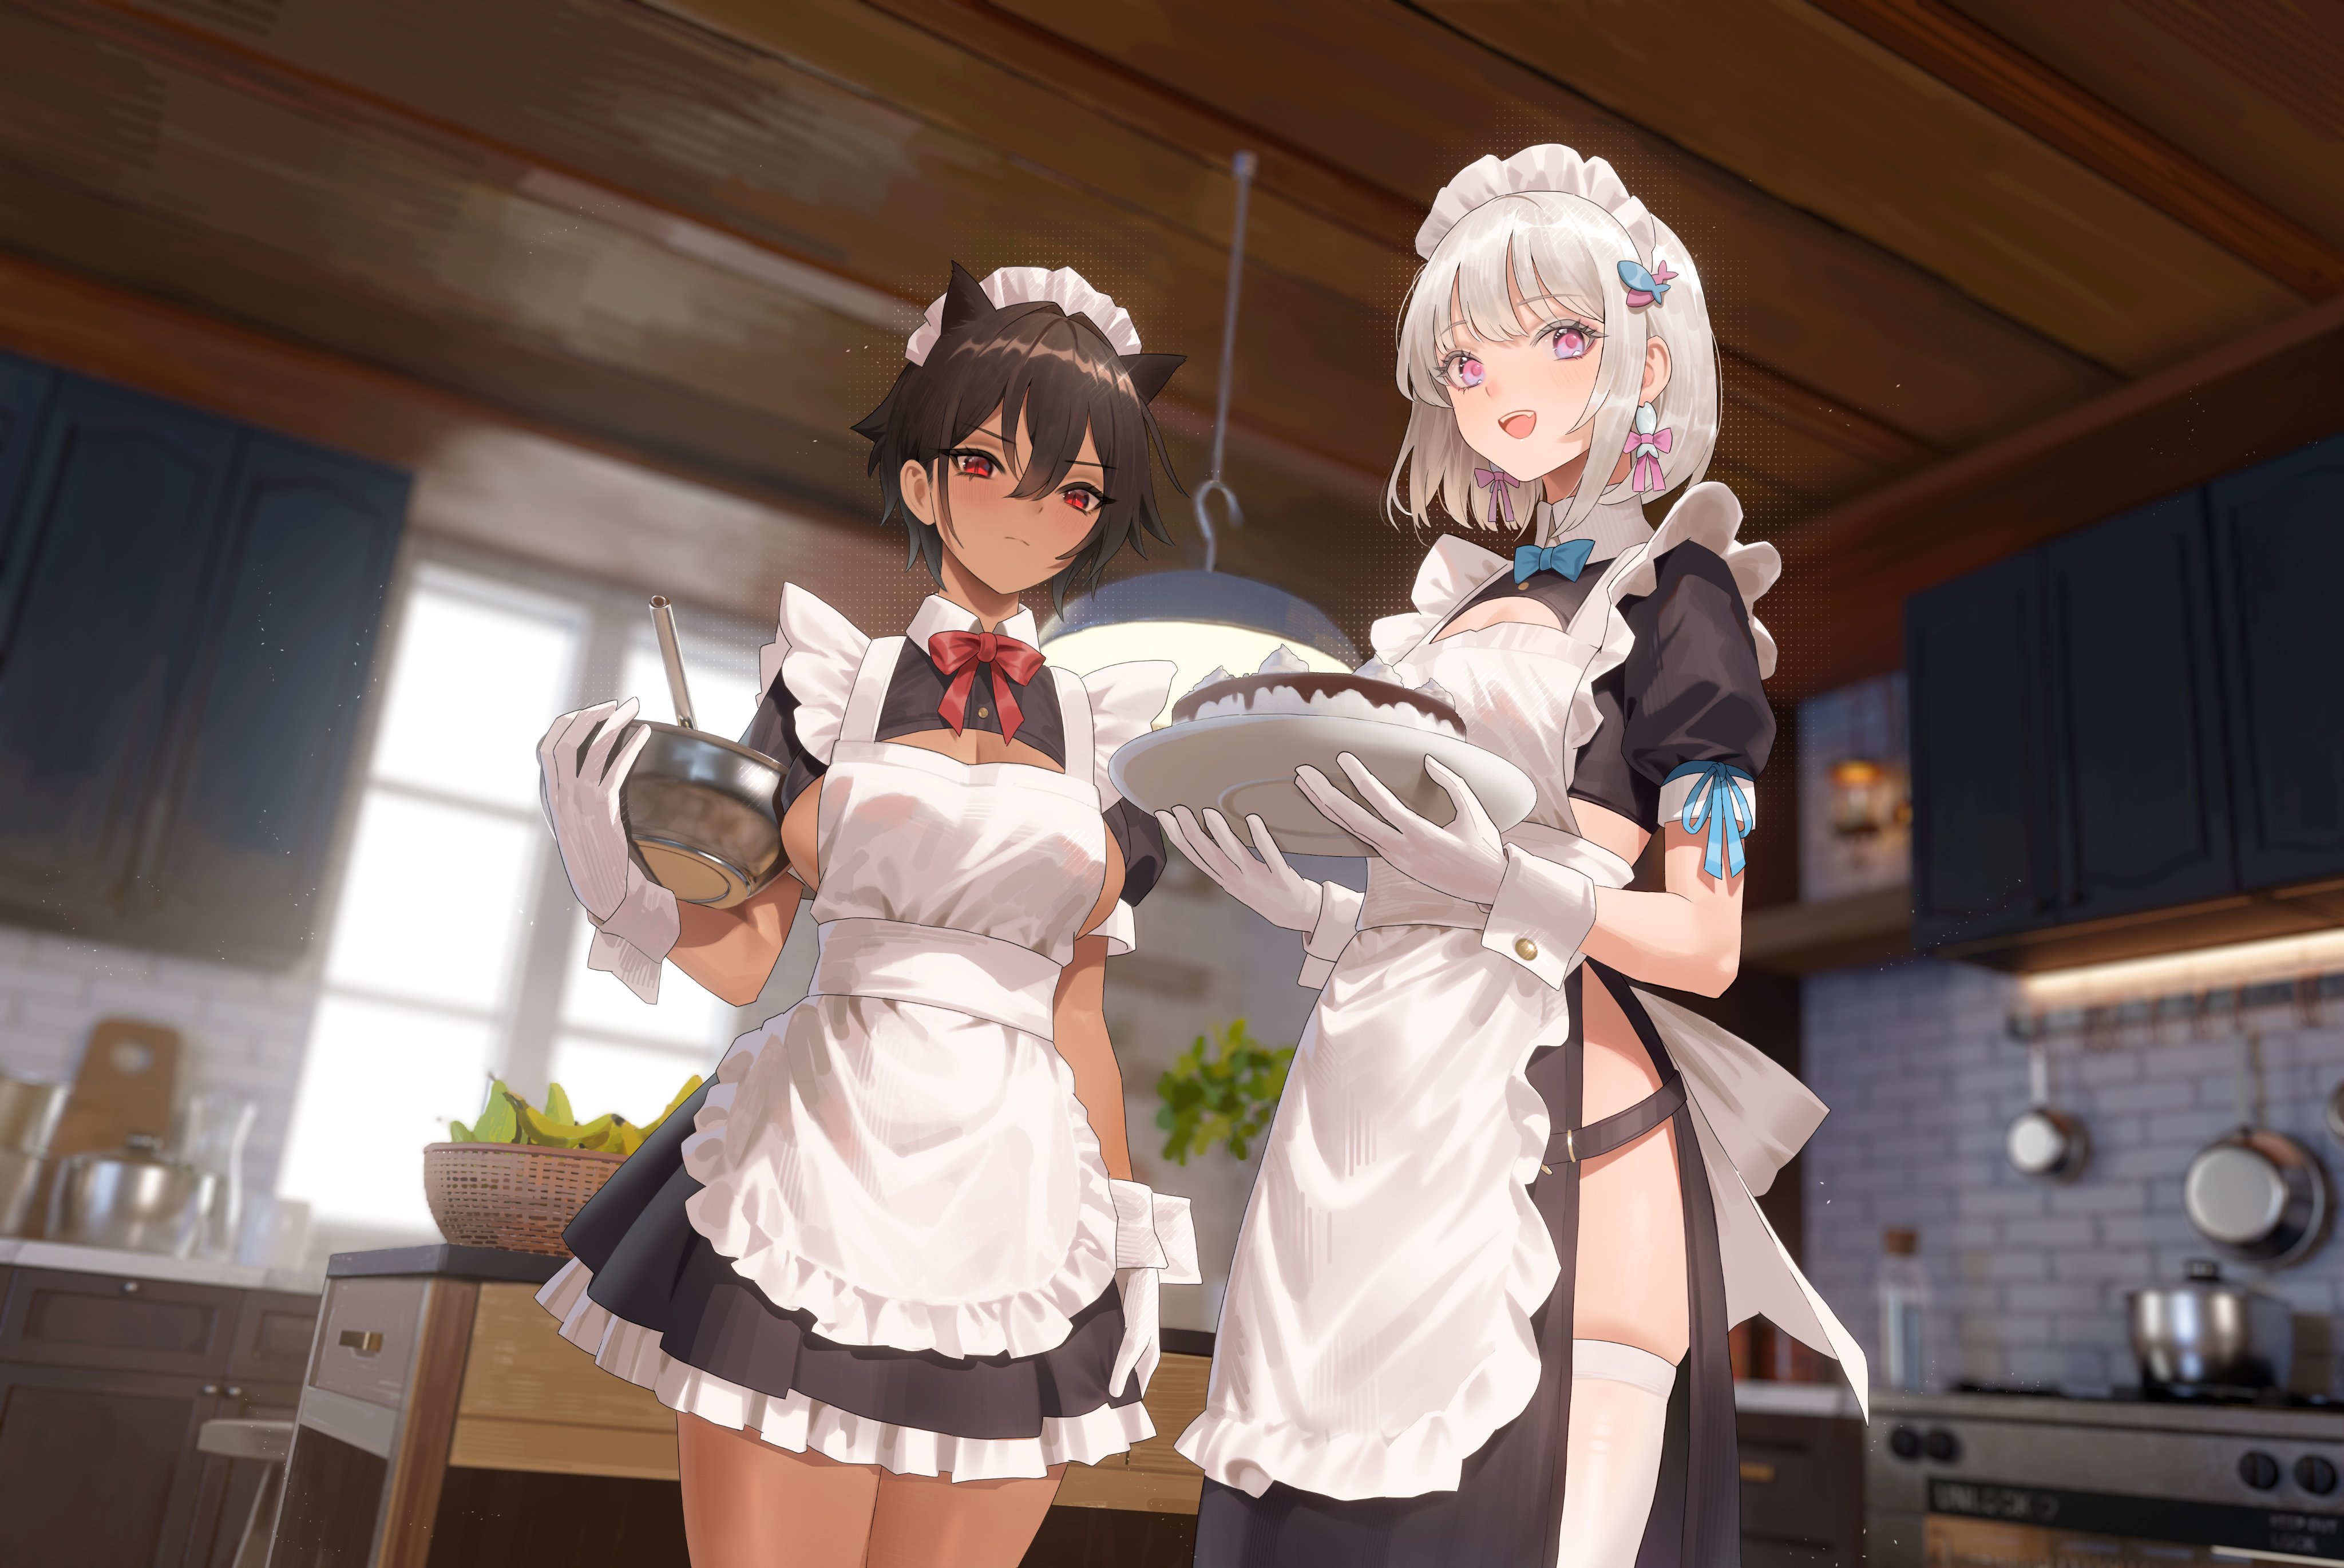 Anime 4096x2740 maid cat girl anime girls maid outfit